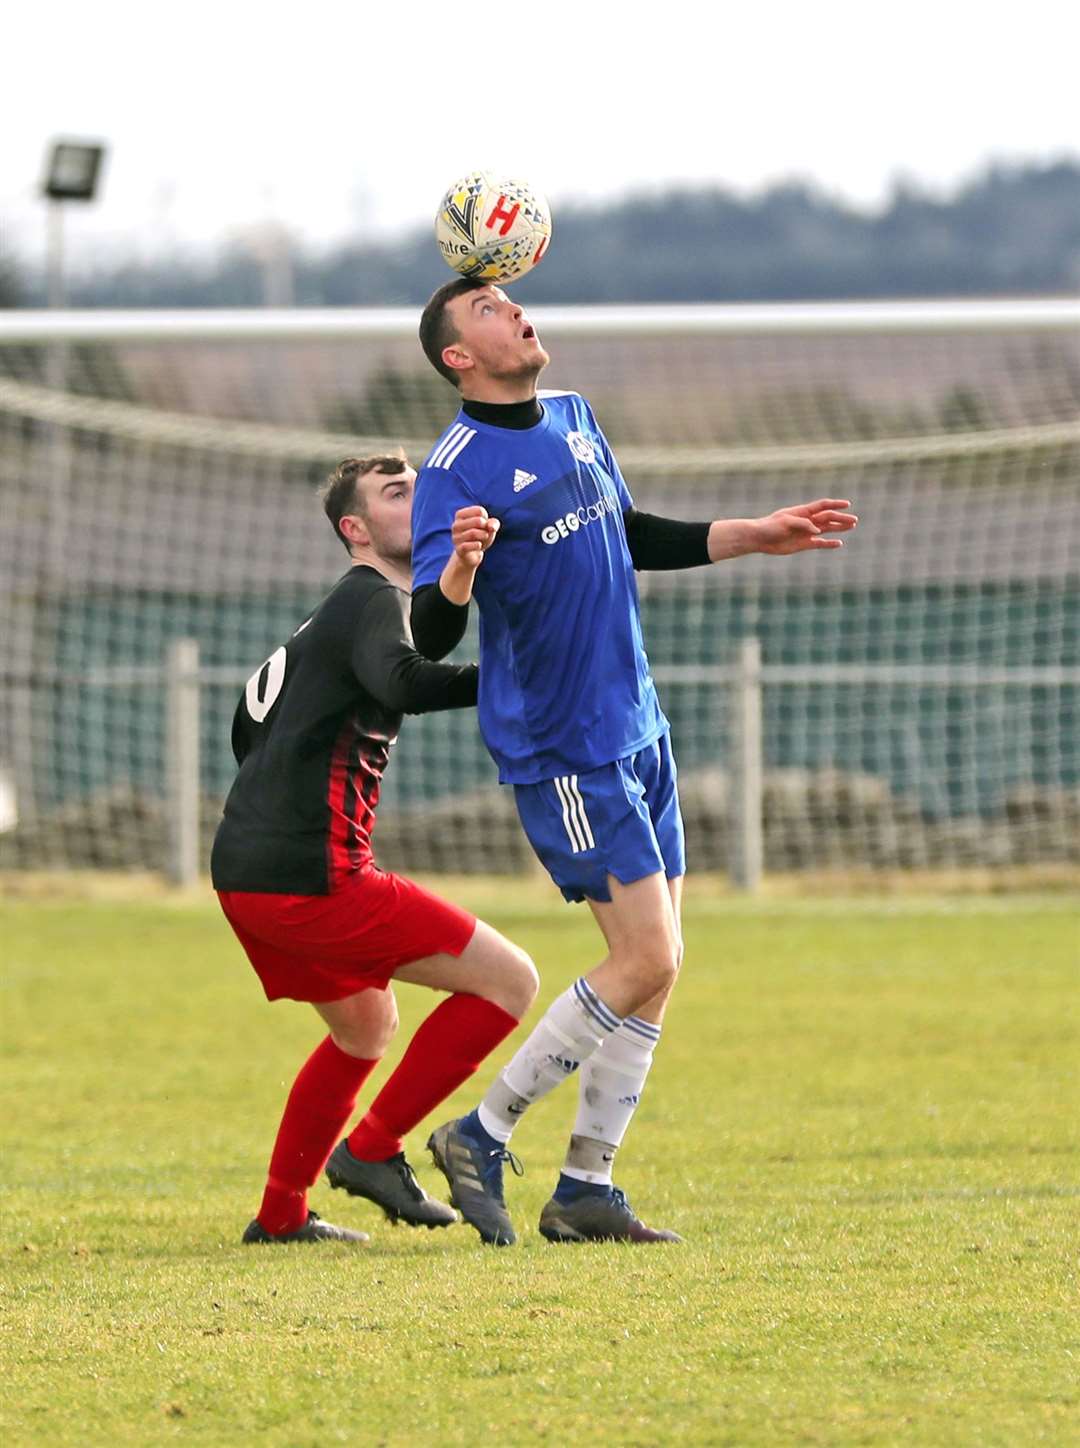 Invergordon's Ken Morrison appears to balance the ball on his head as Colin Henstridge of Halkirk United looks on. Picture: James Gunn